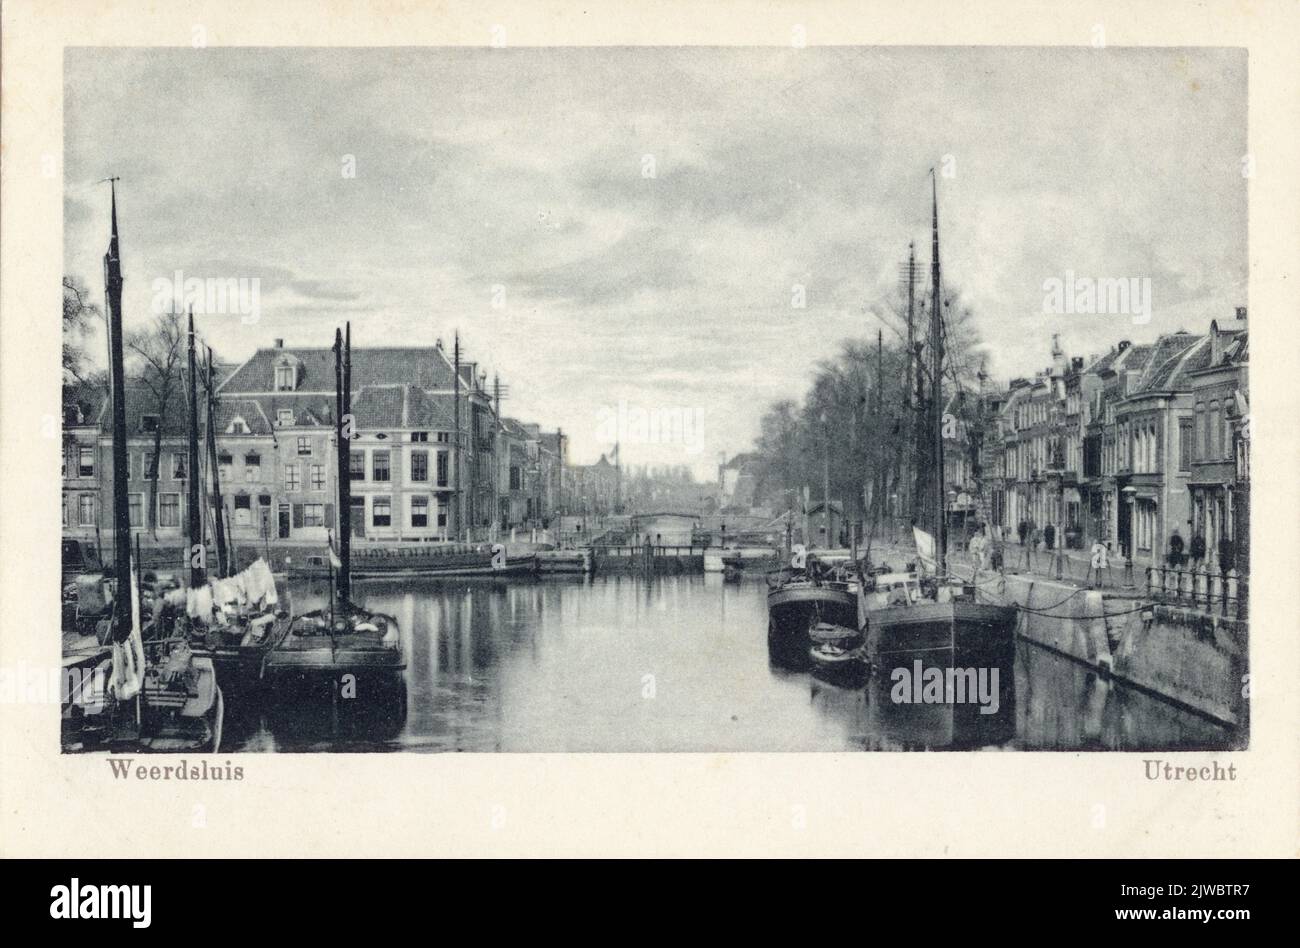 View of the Stadsbuitengracht in Utrecht with the Bemuurd Weerd O.Z.; In the background some houses on the Weerdsingel W.Z. And the Weerdsluis. Stock Photo